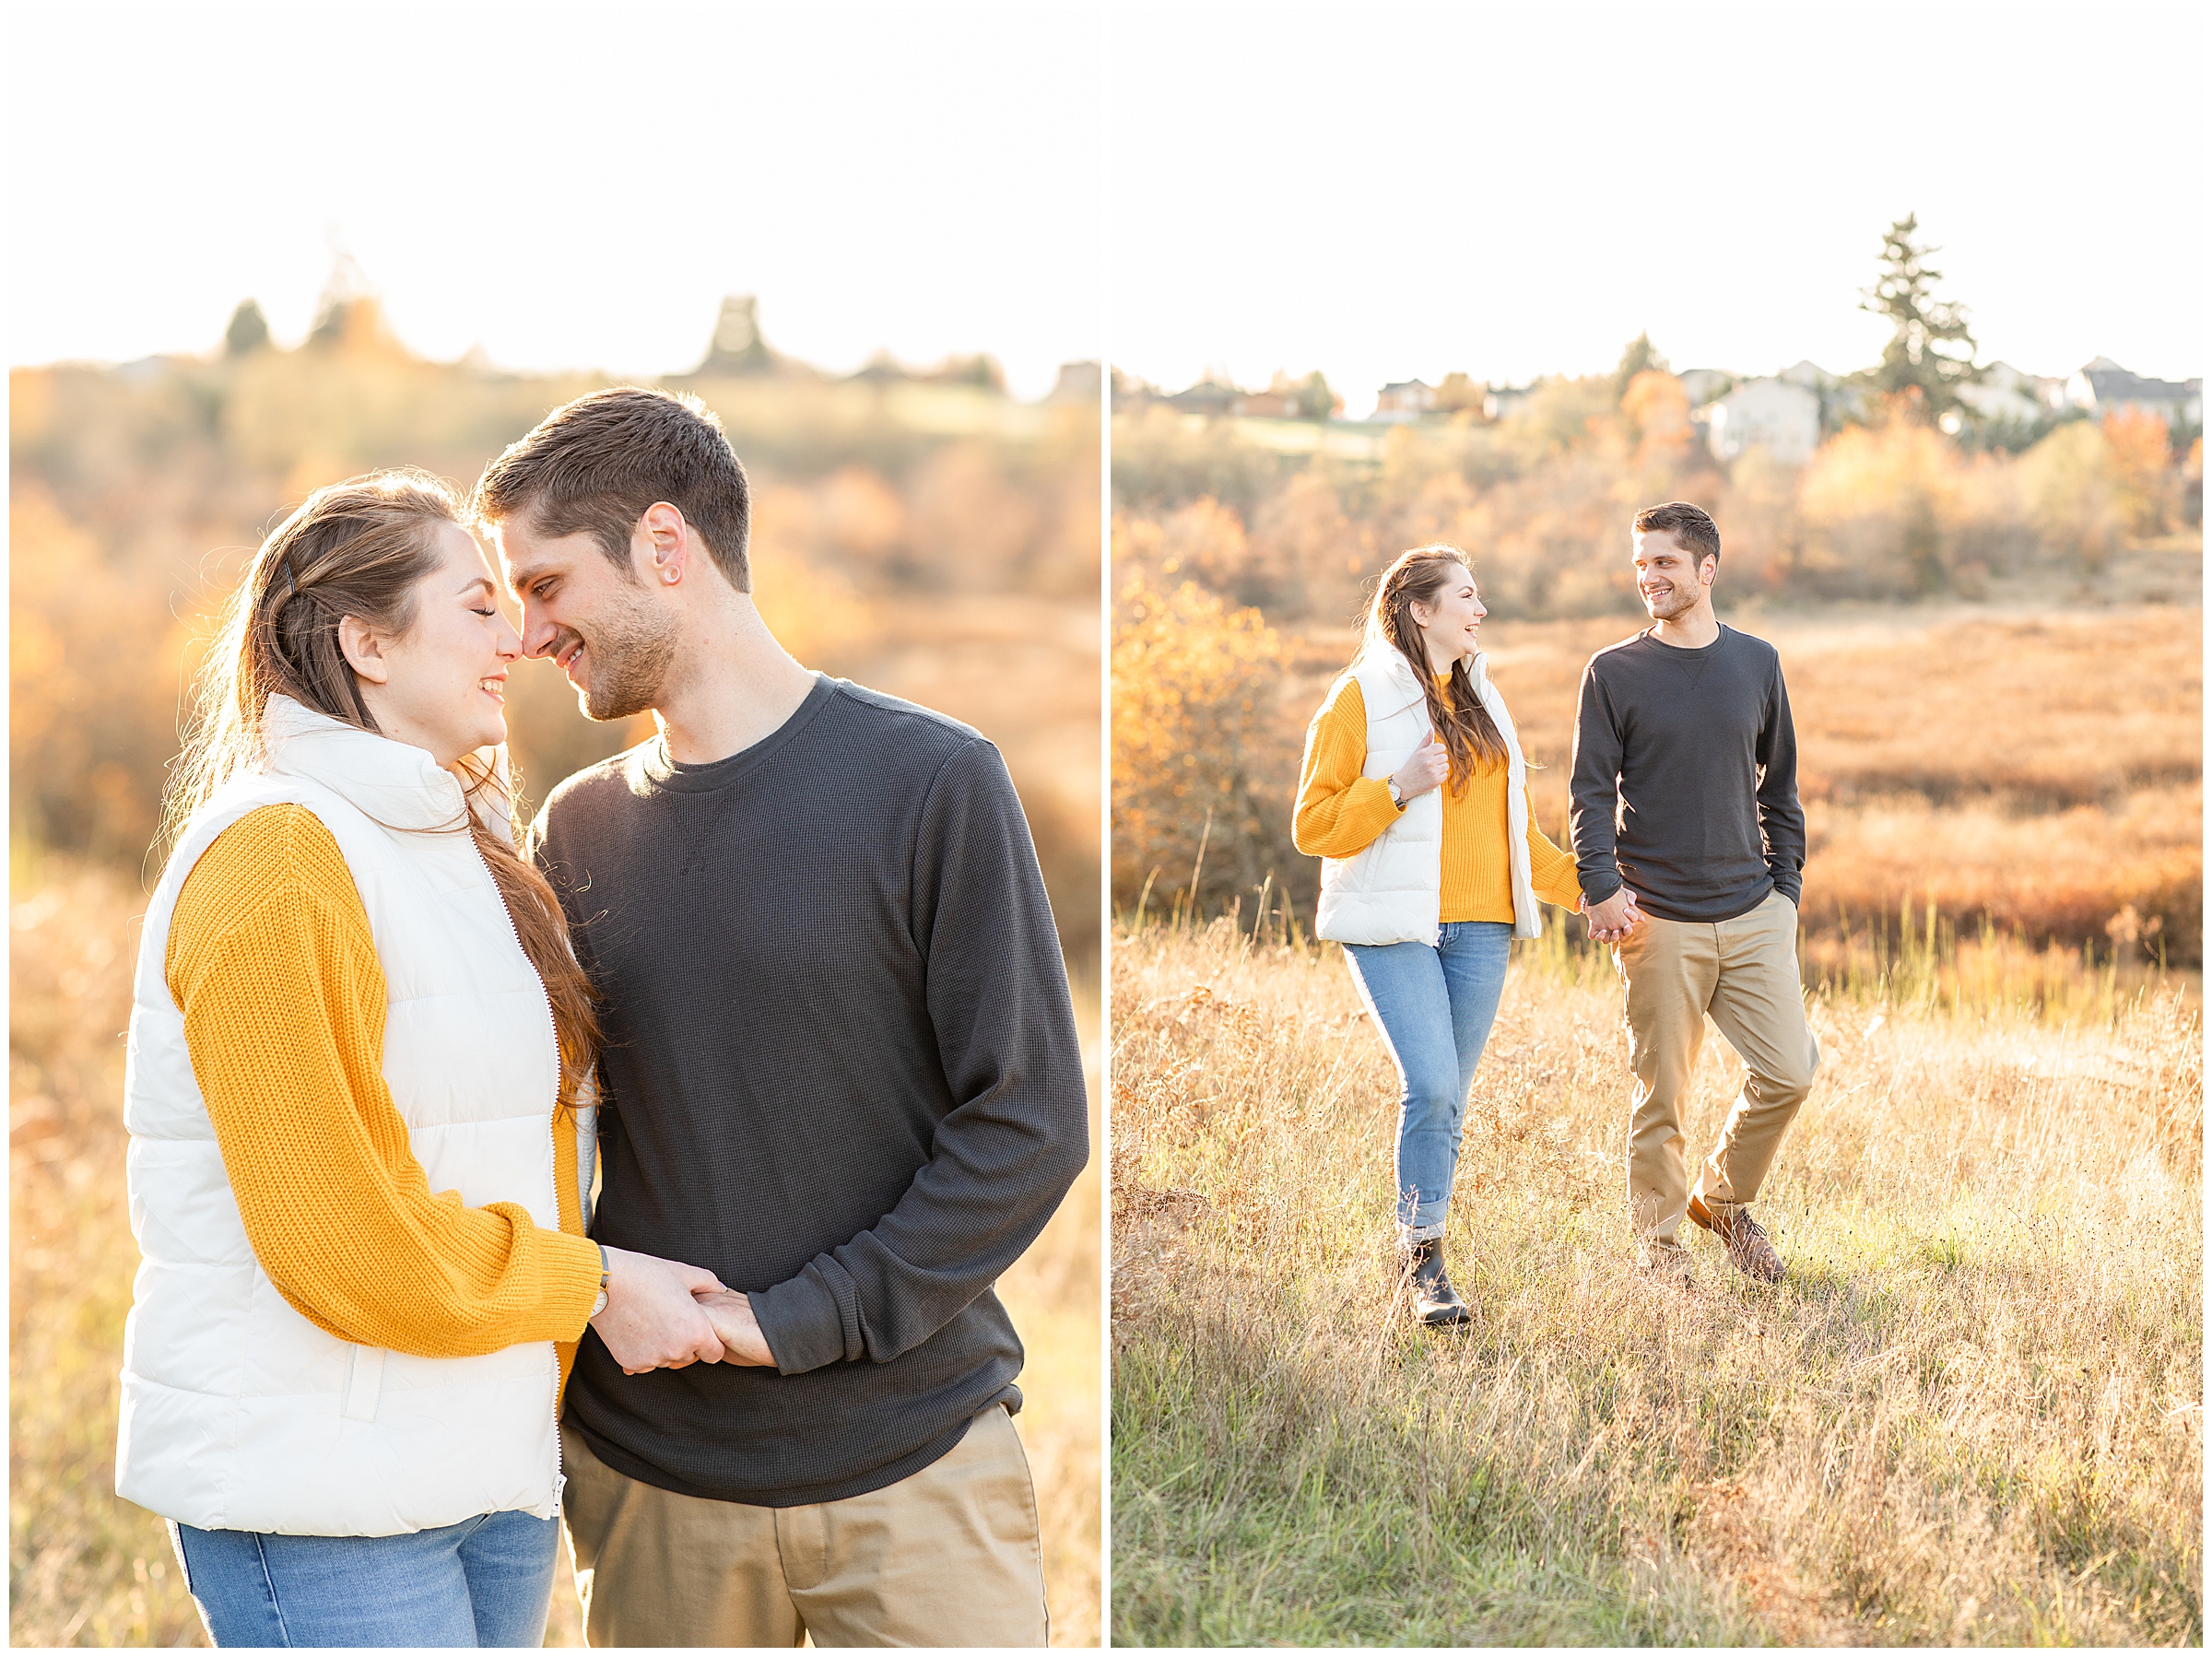 Jessica and Ben's engagement session